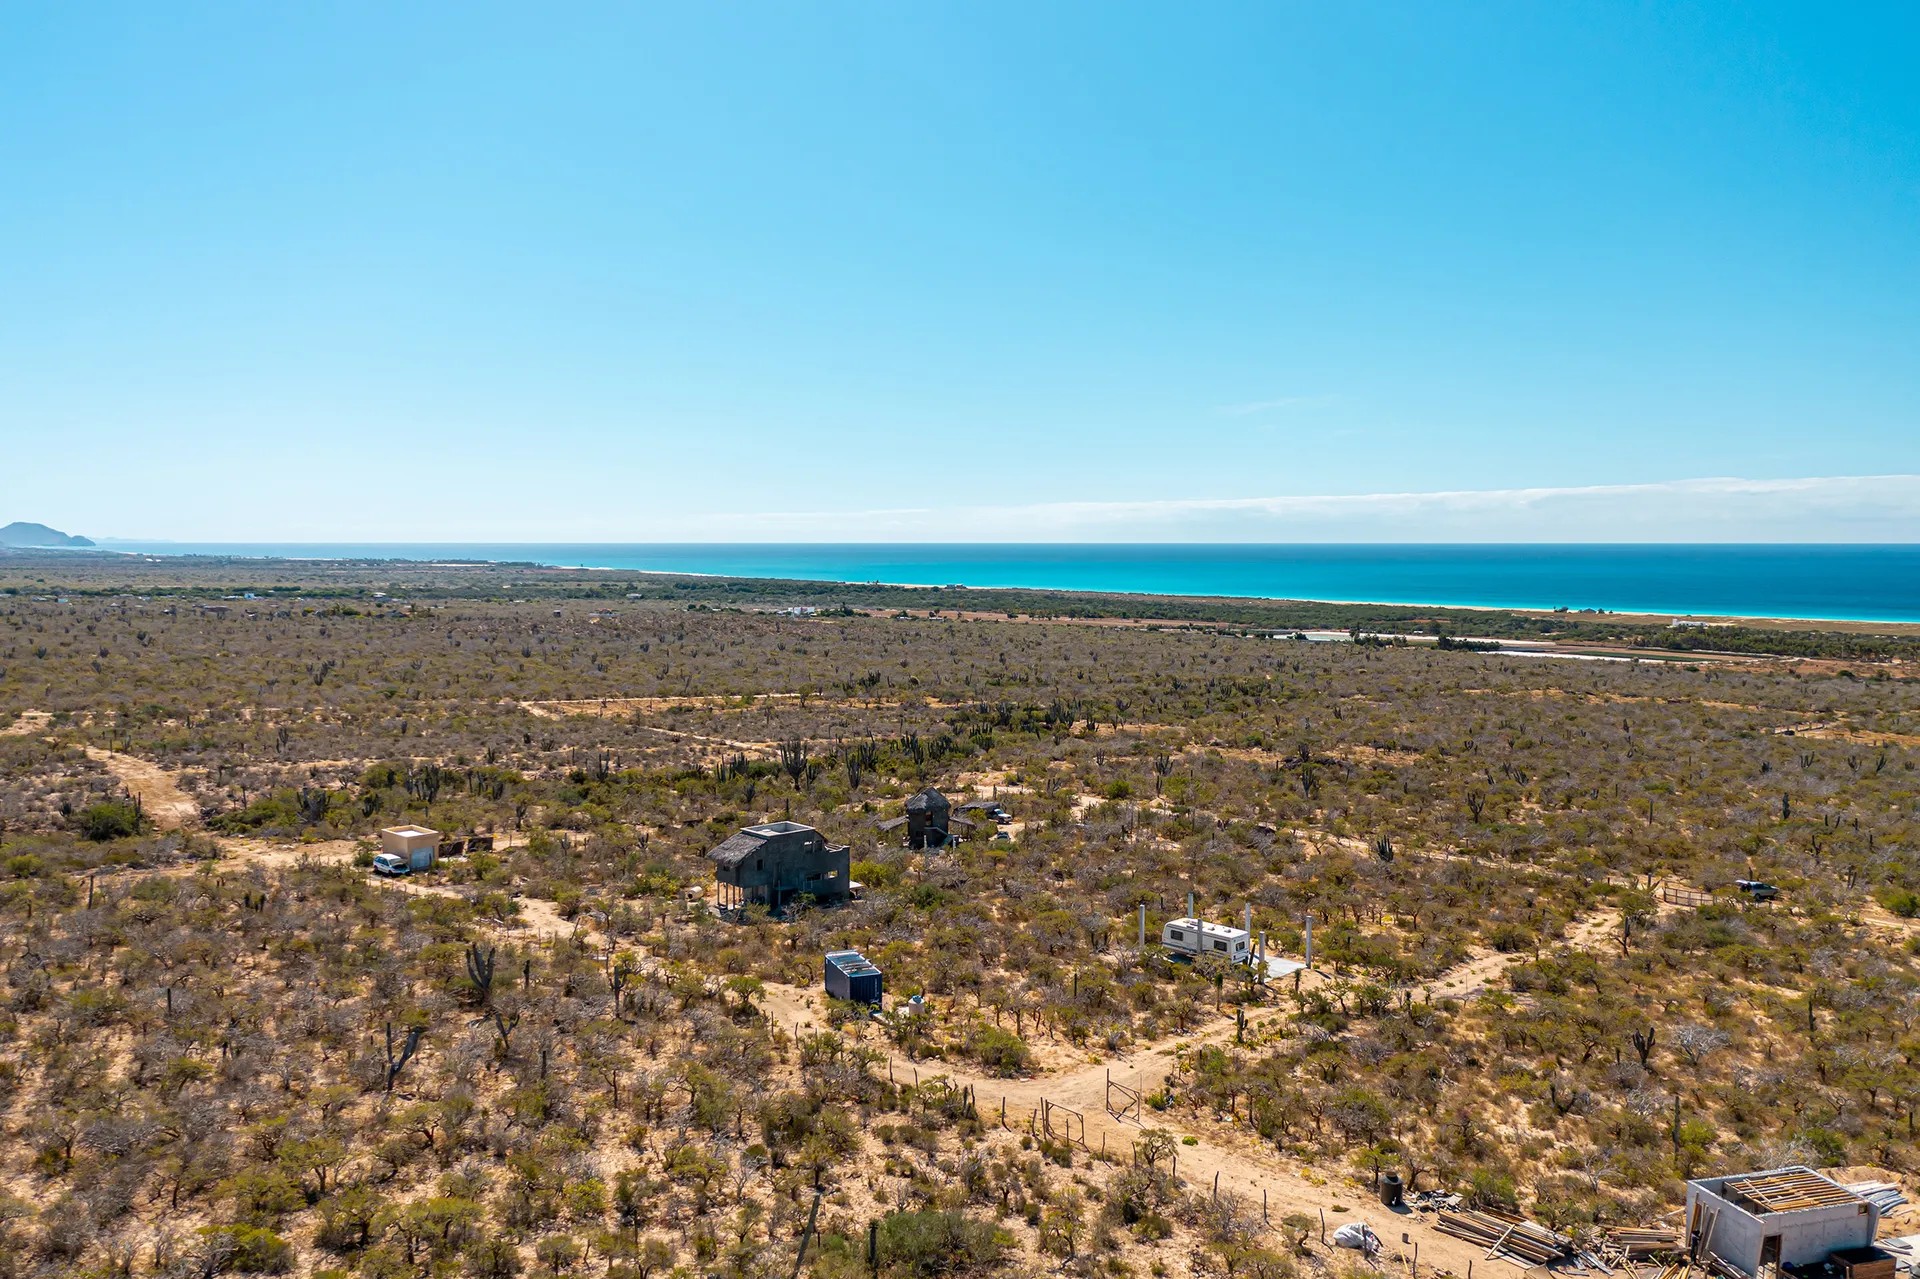 Build your dream home on this spacious 5000m2 lot located in the up-and-coming neighborhood of Las Playitas. Infrastructure in place and ready to build.